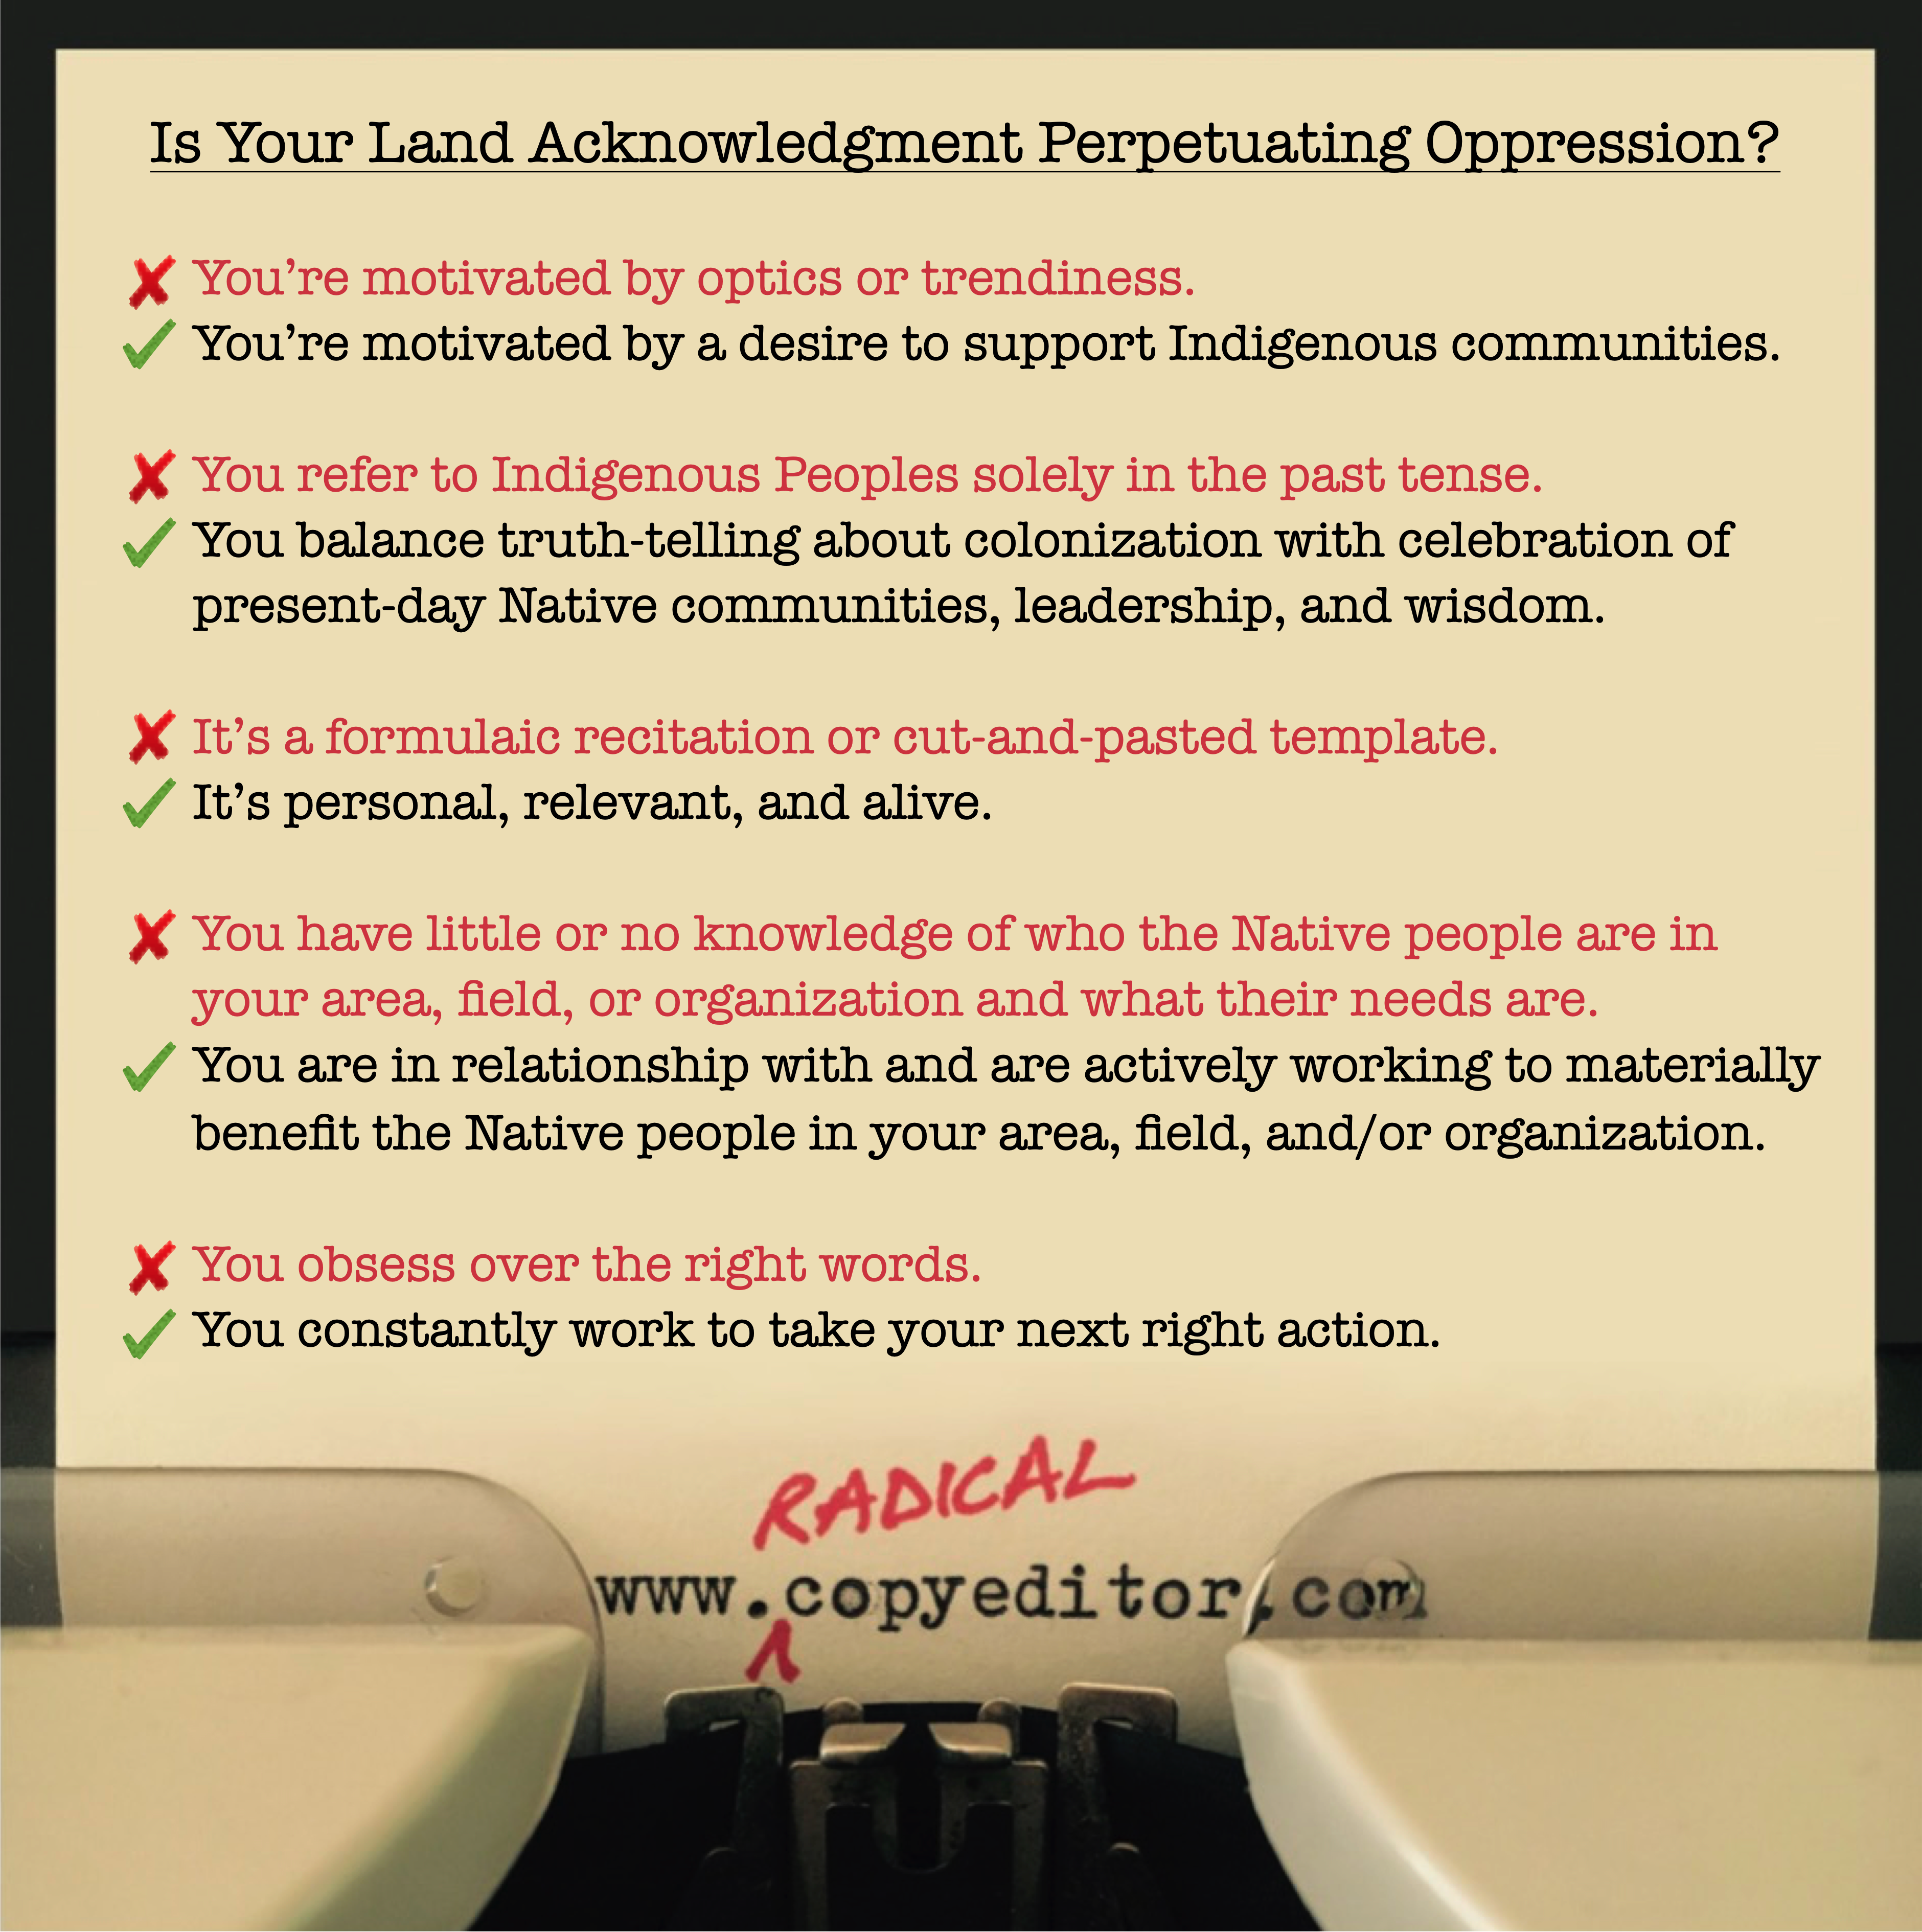 Is your land acknowledgment perpetuating oppression?